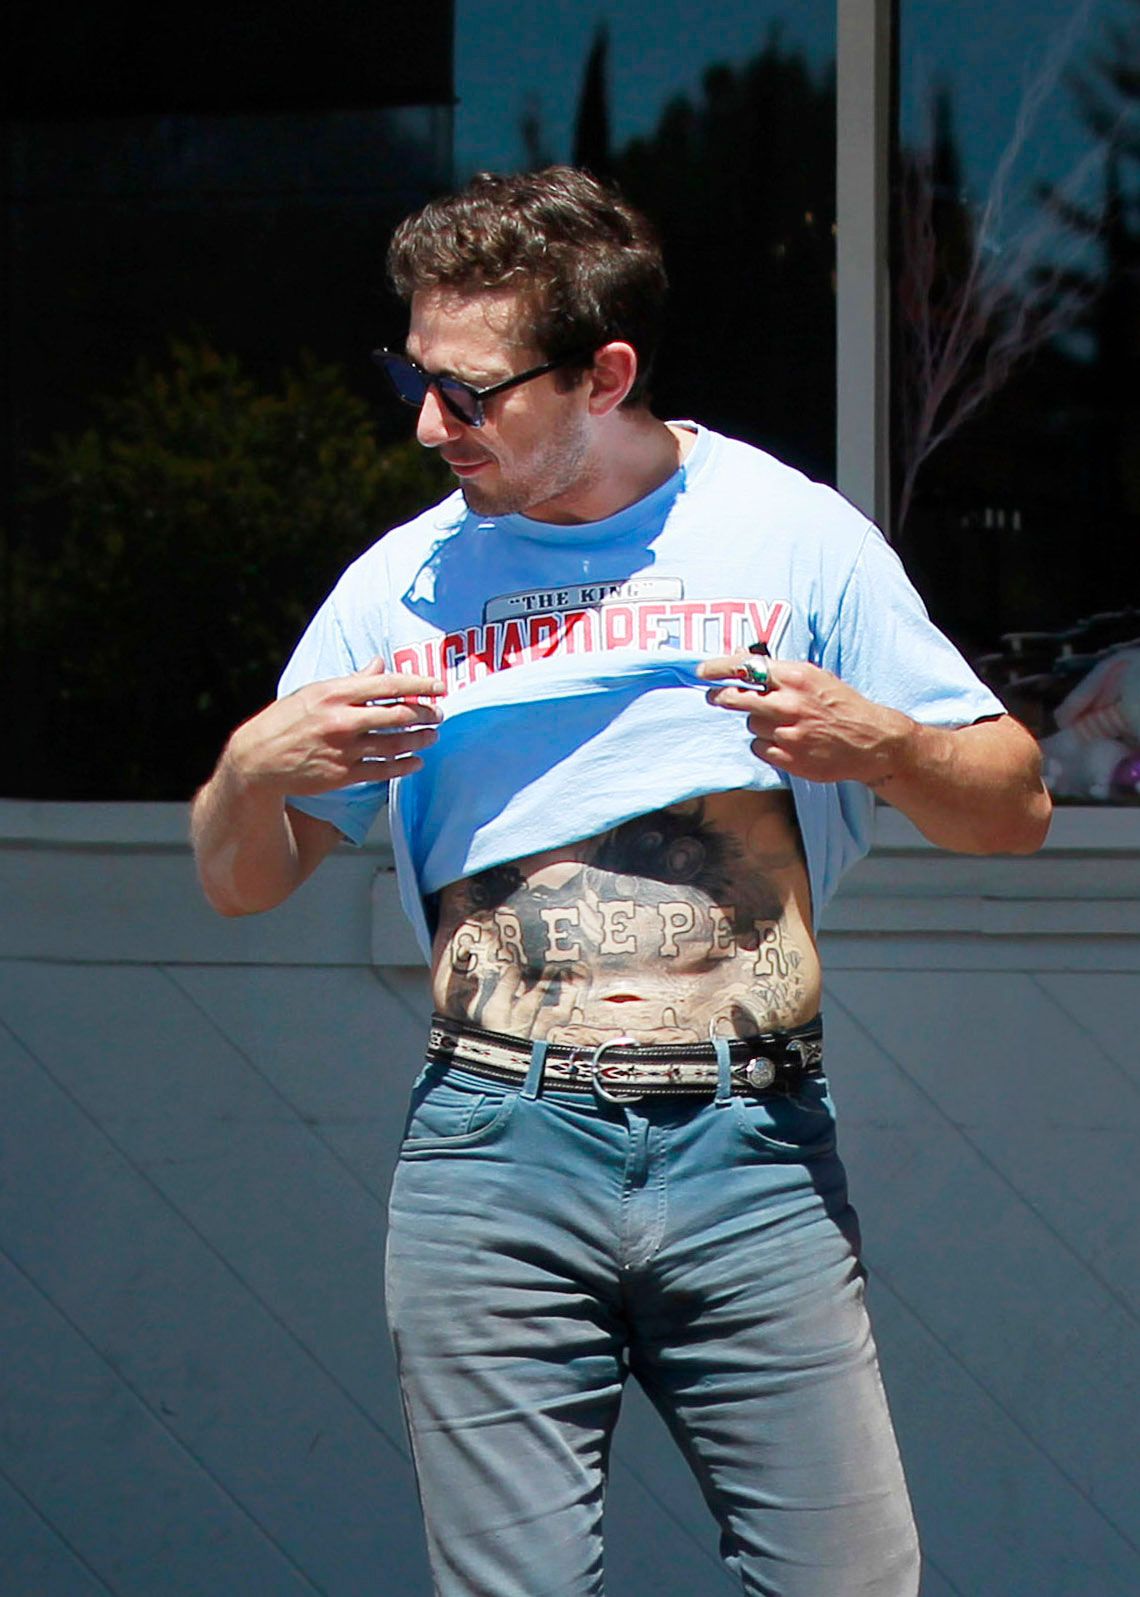 Shia Labeouf S Tattoo Says Creeper Across His Stomach And It S Perfect